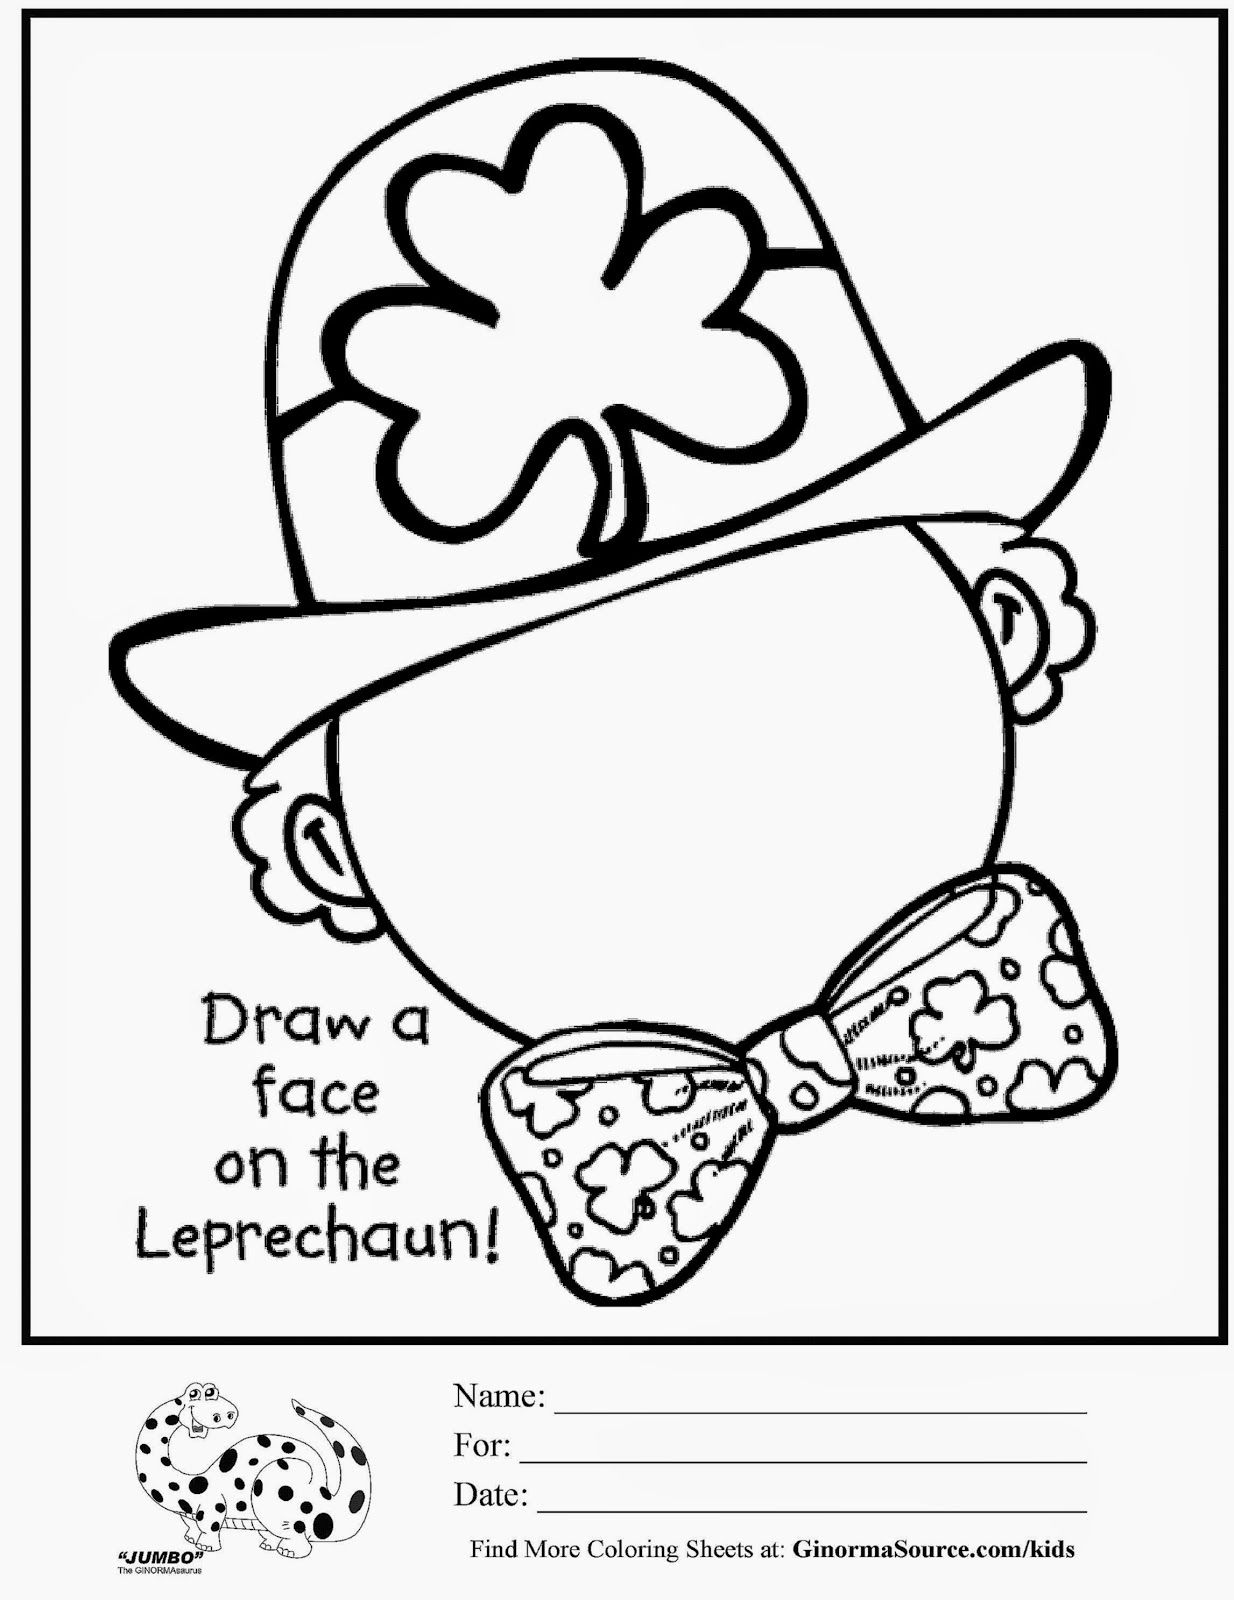 St Patricks Coloring Pages | Free Coloring Pages